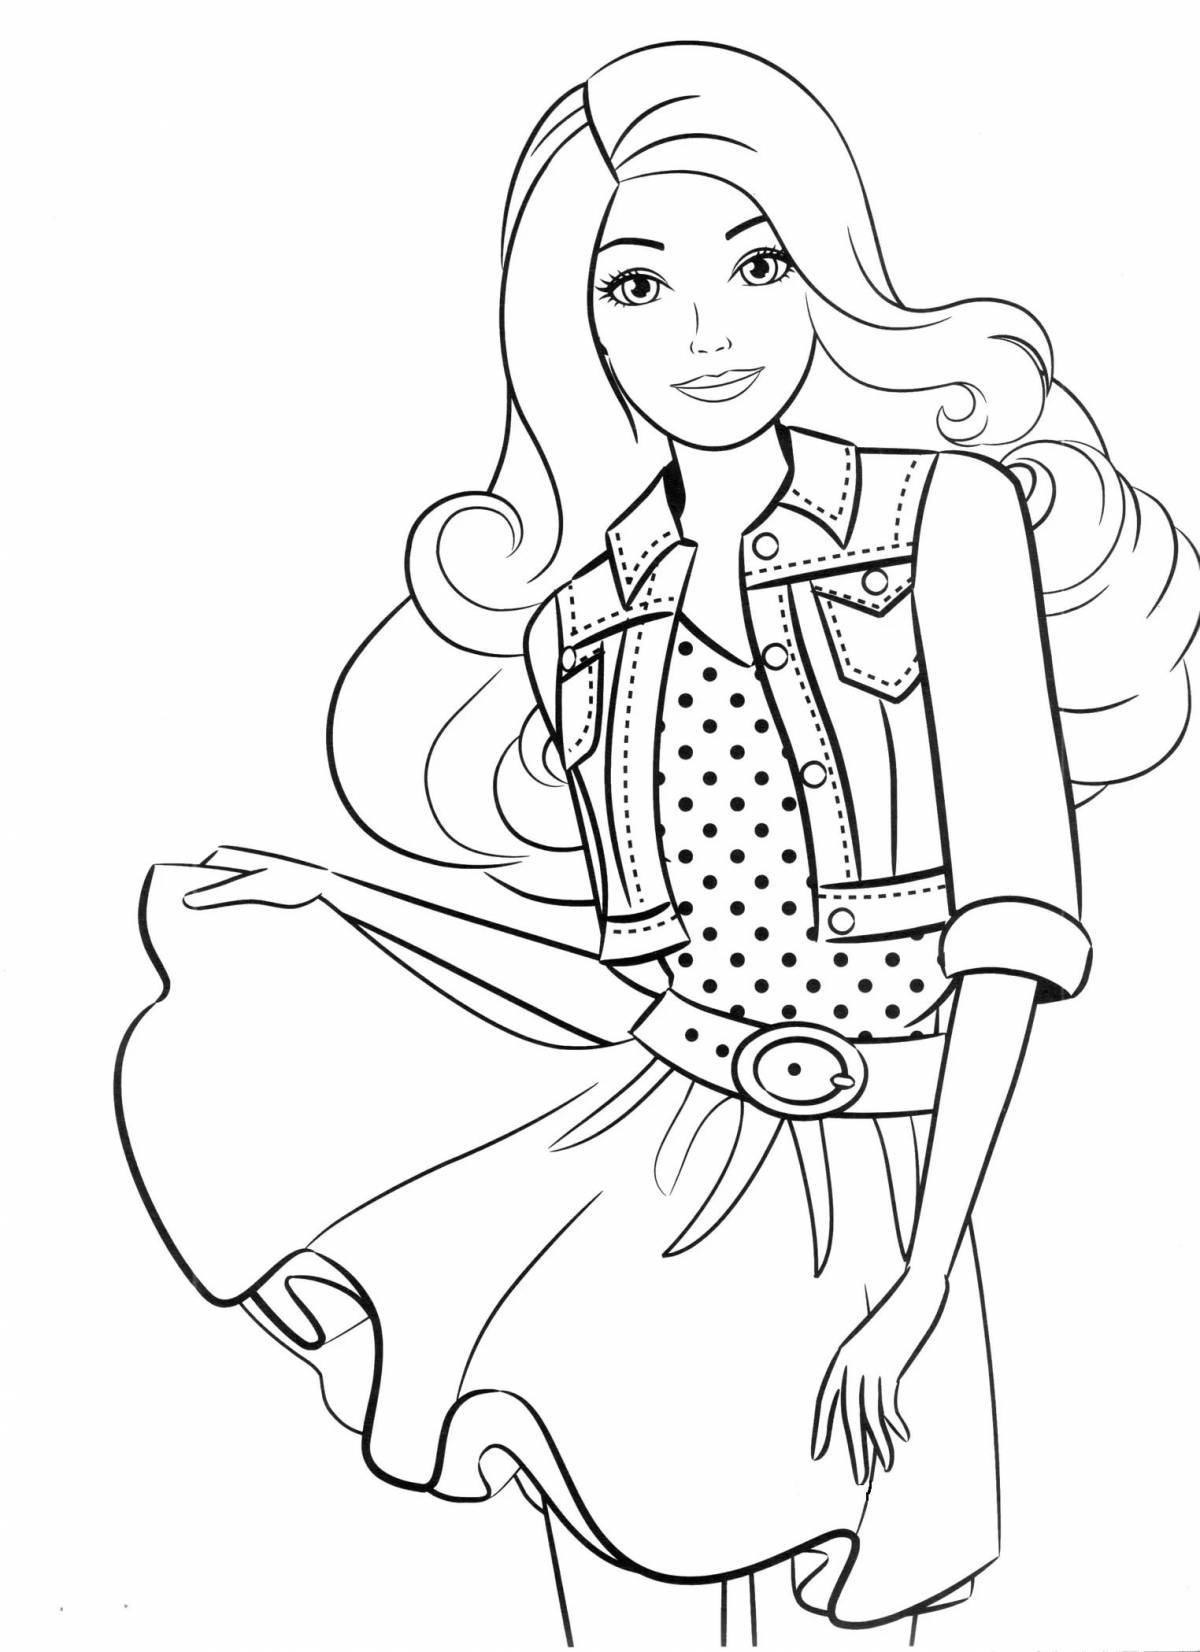 Colorful barbie coloring page